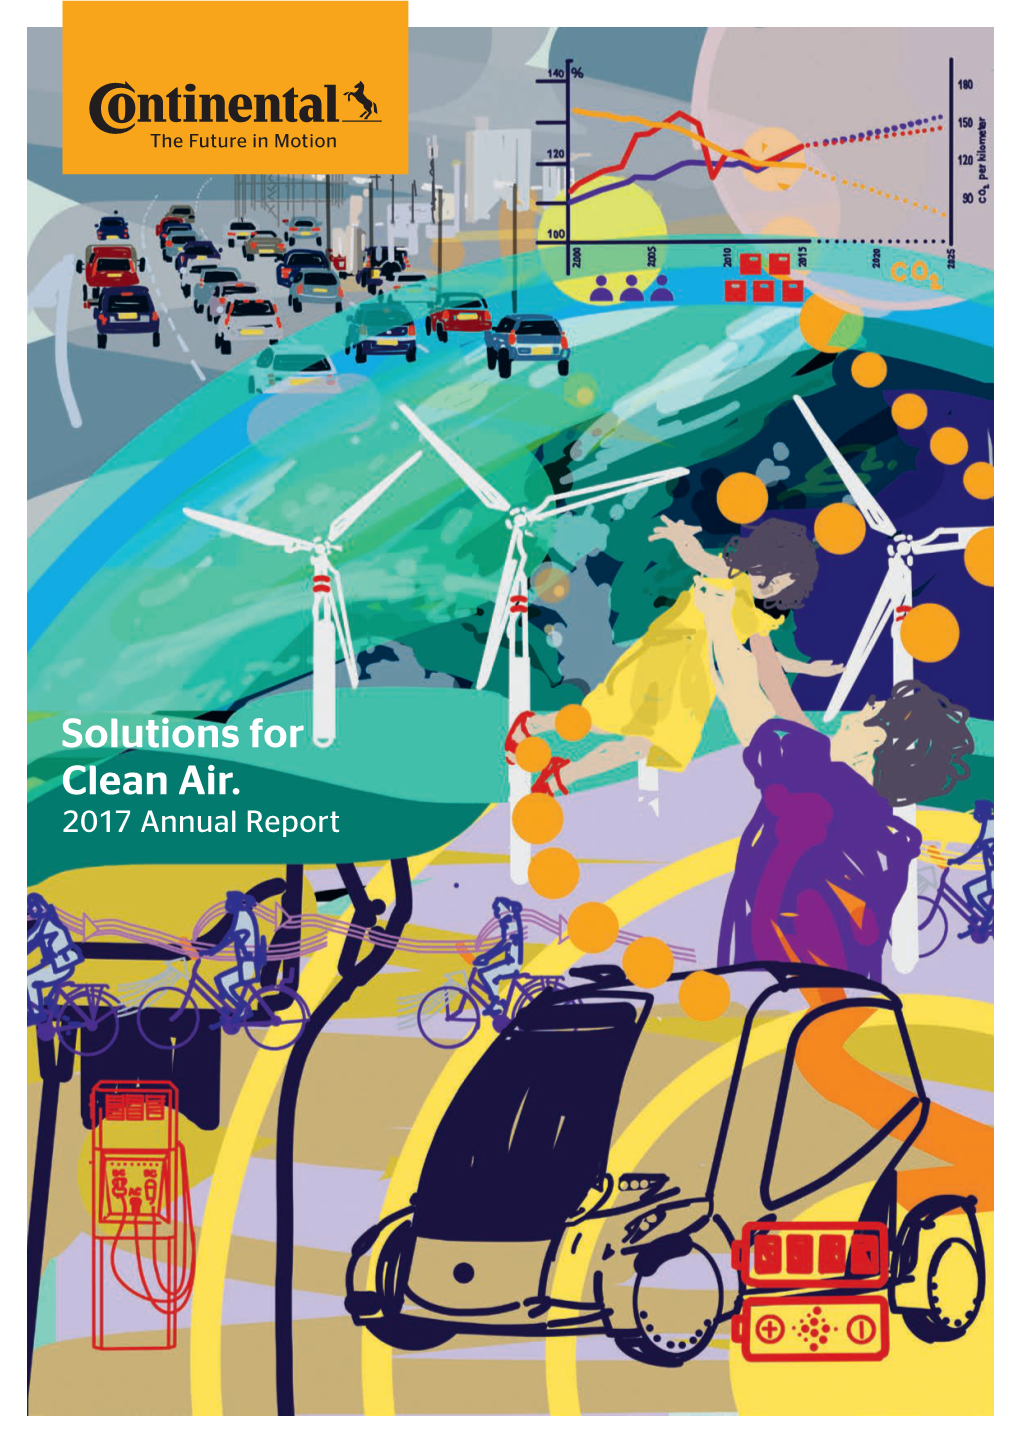 Annual Report 2017 Highlights